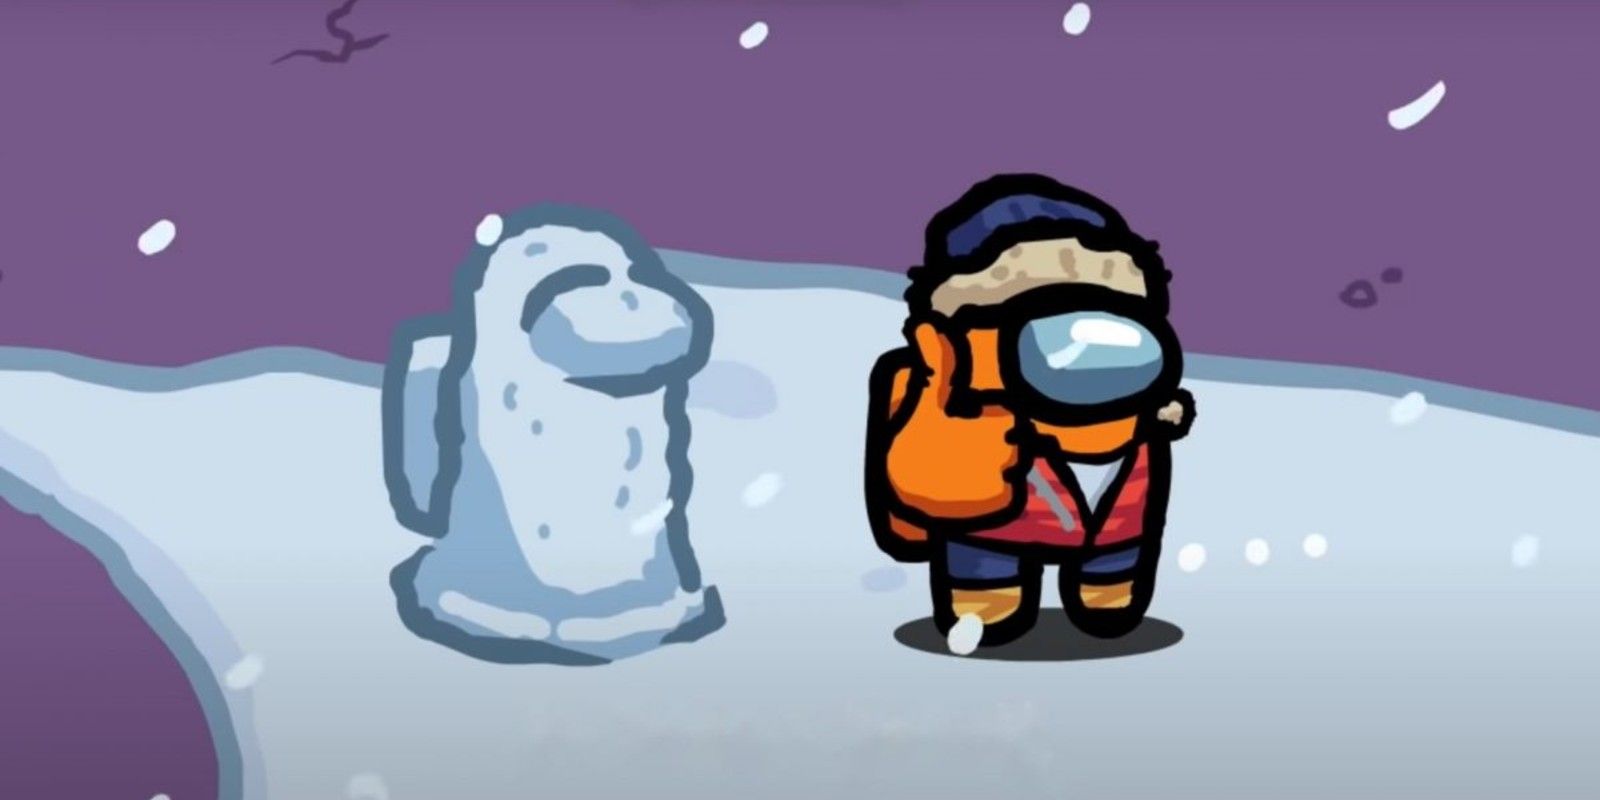 An Among Us player stands next to a snowman Impostor version